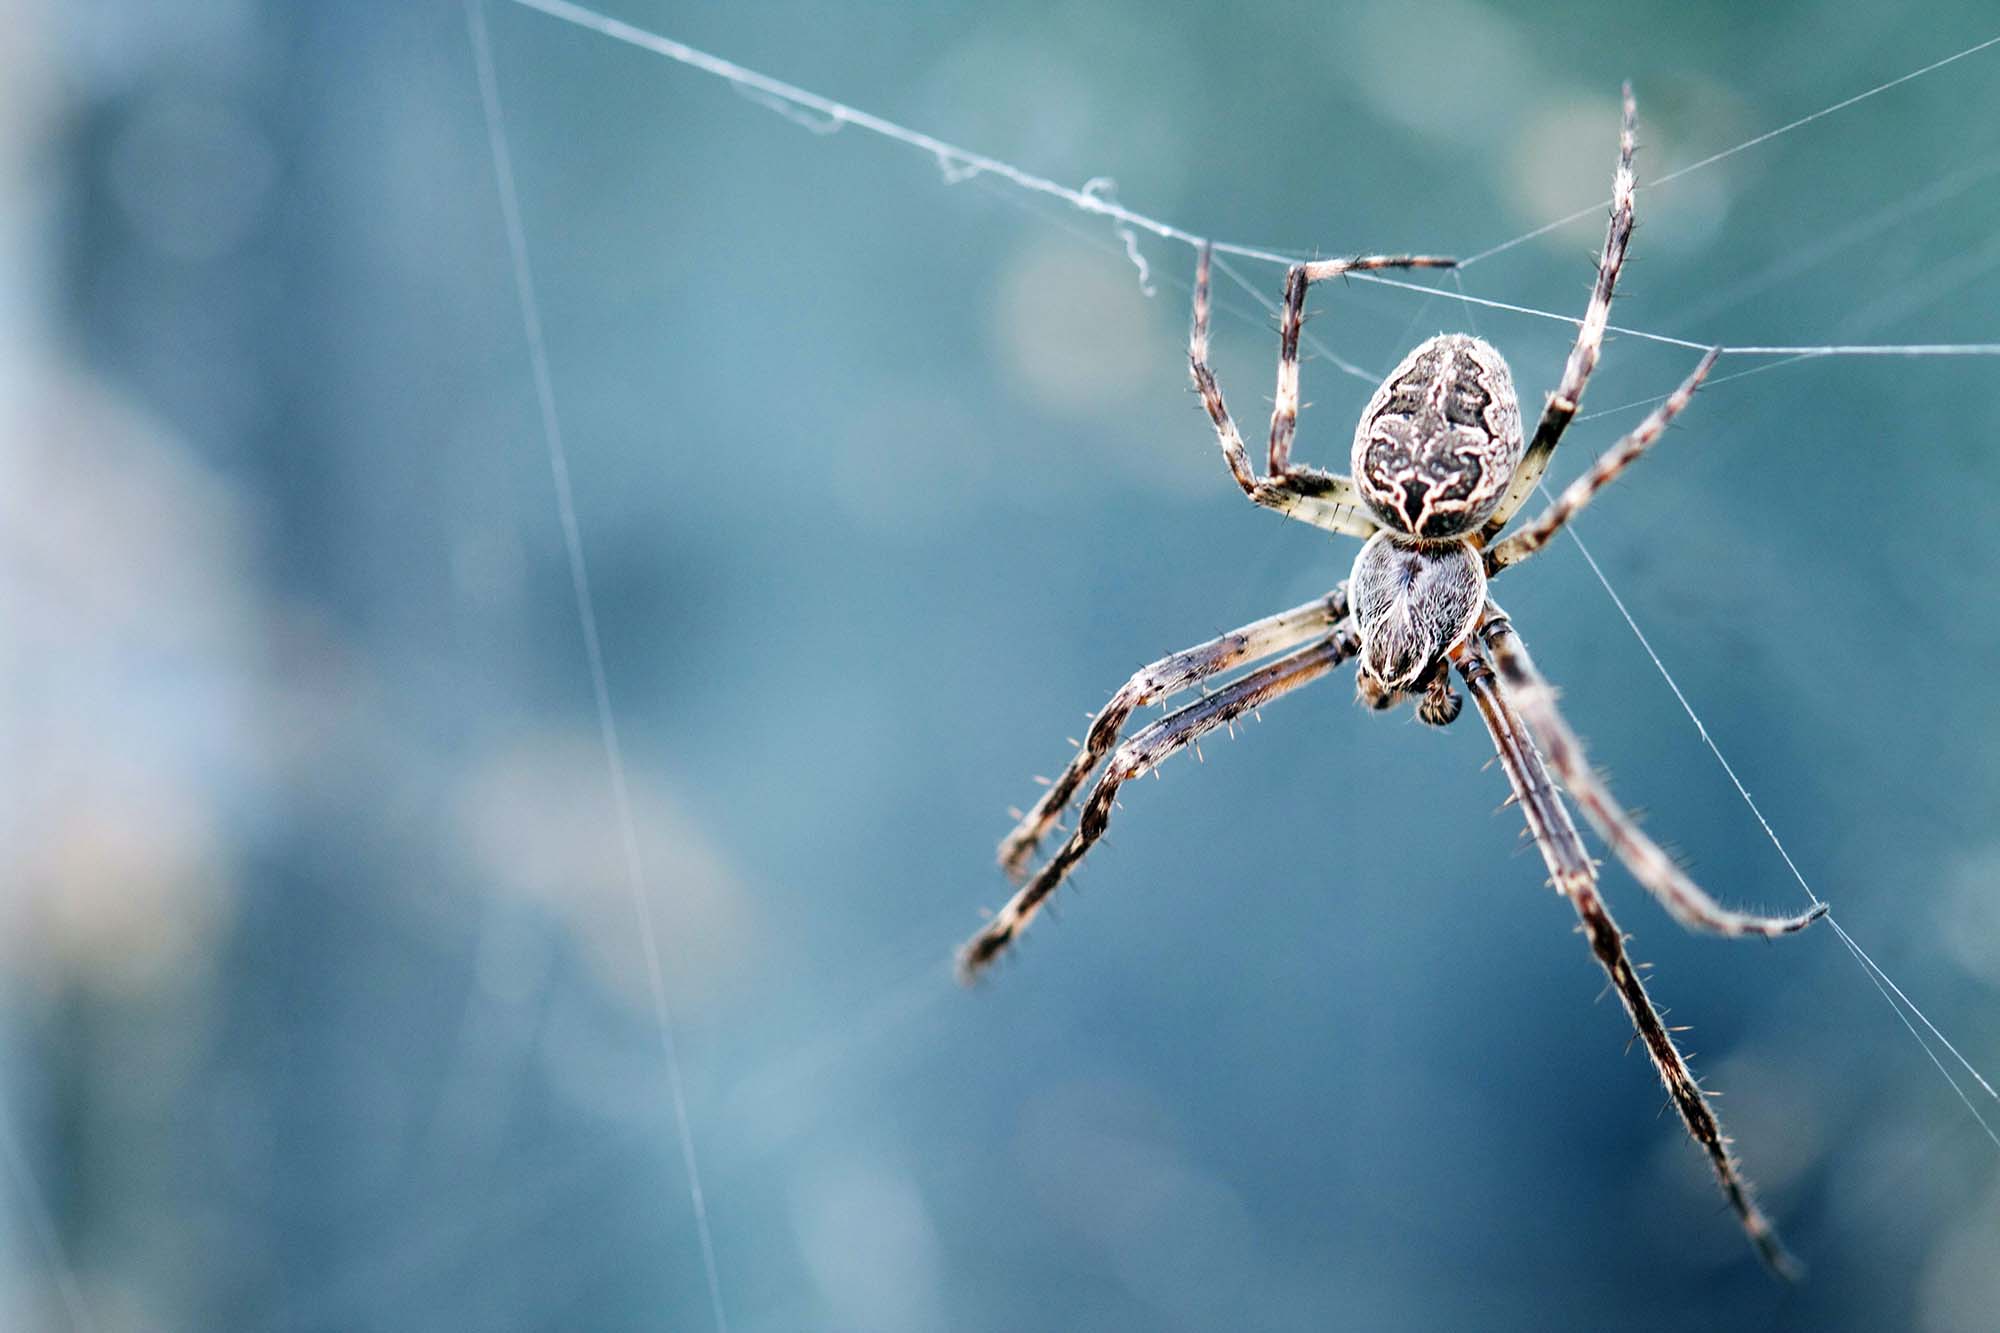 A spider with long legs hanging on the strings of a web